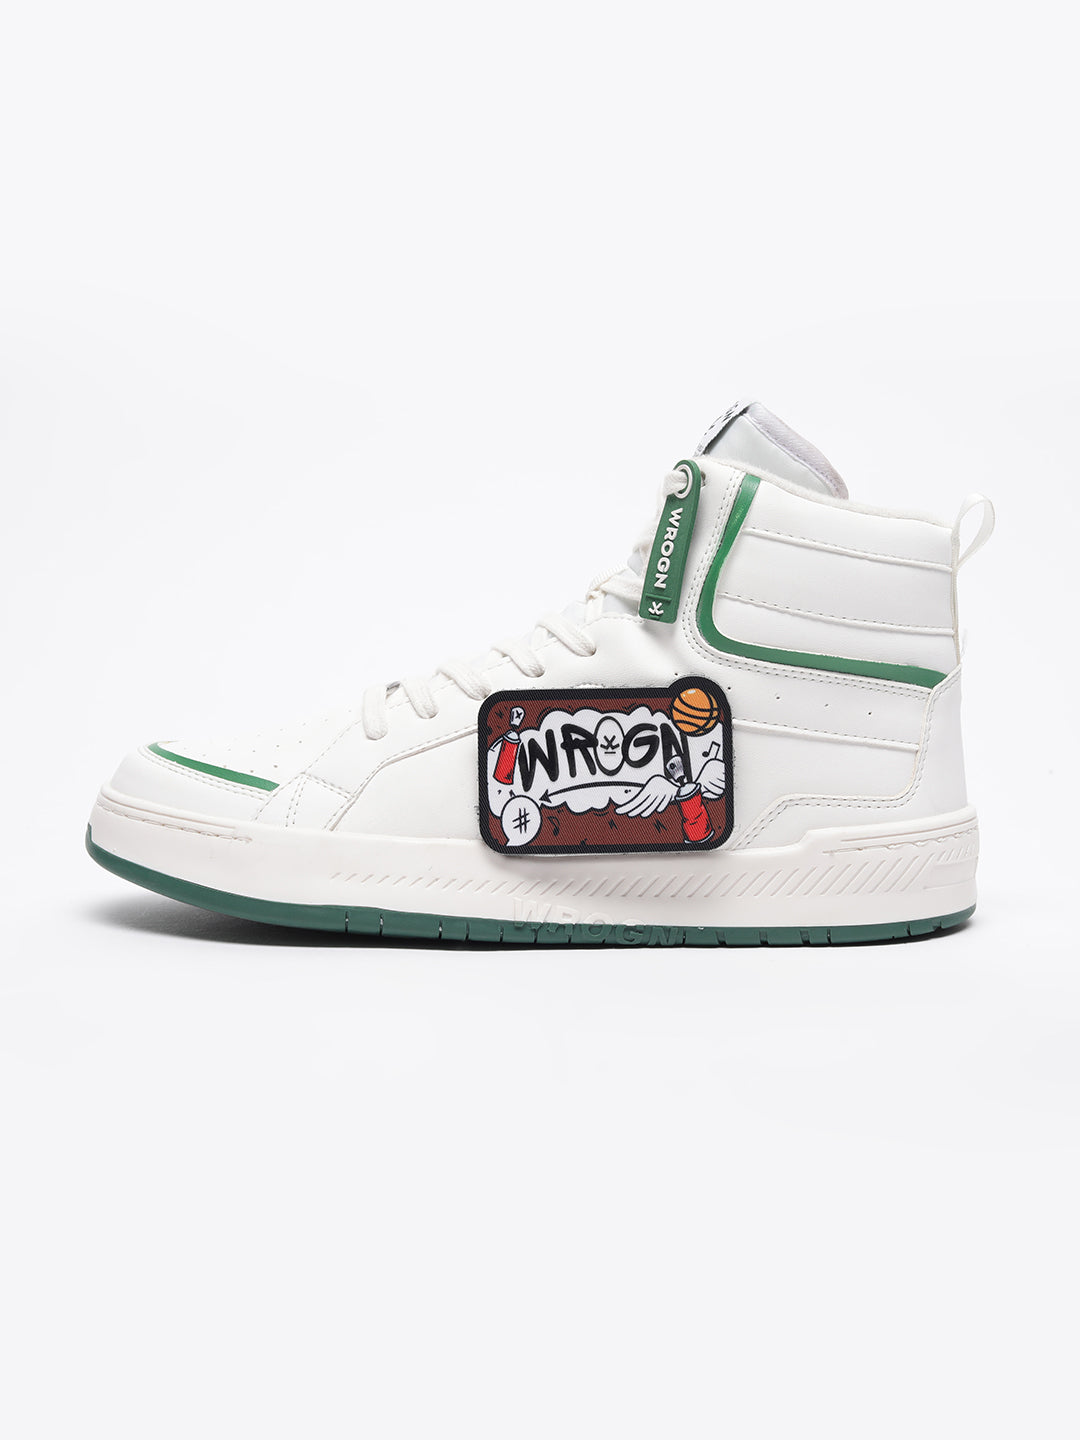 Wrogn Patch White High Top Sneakers